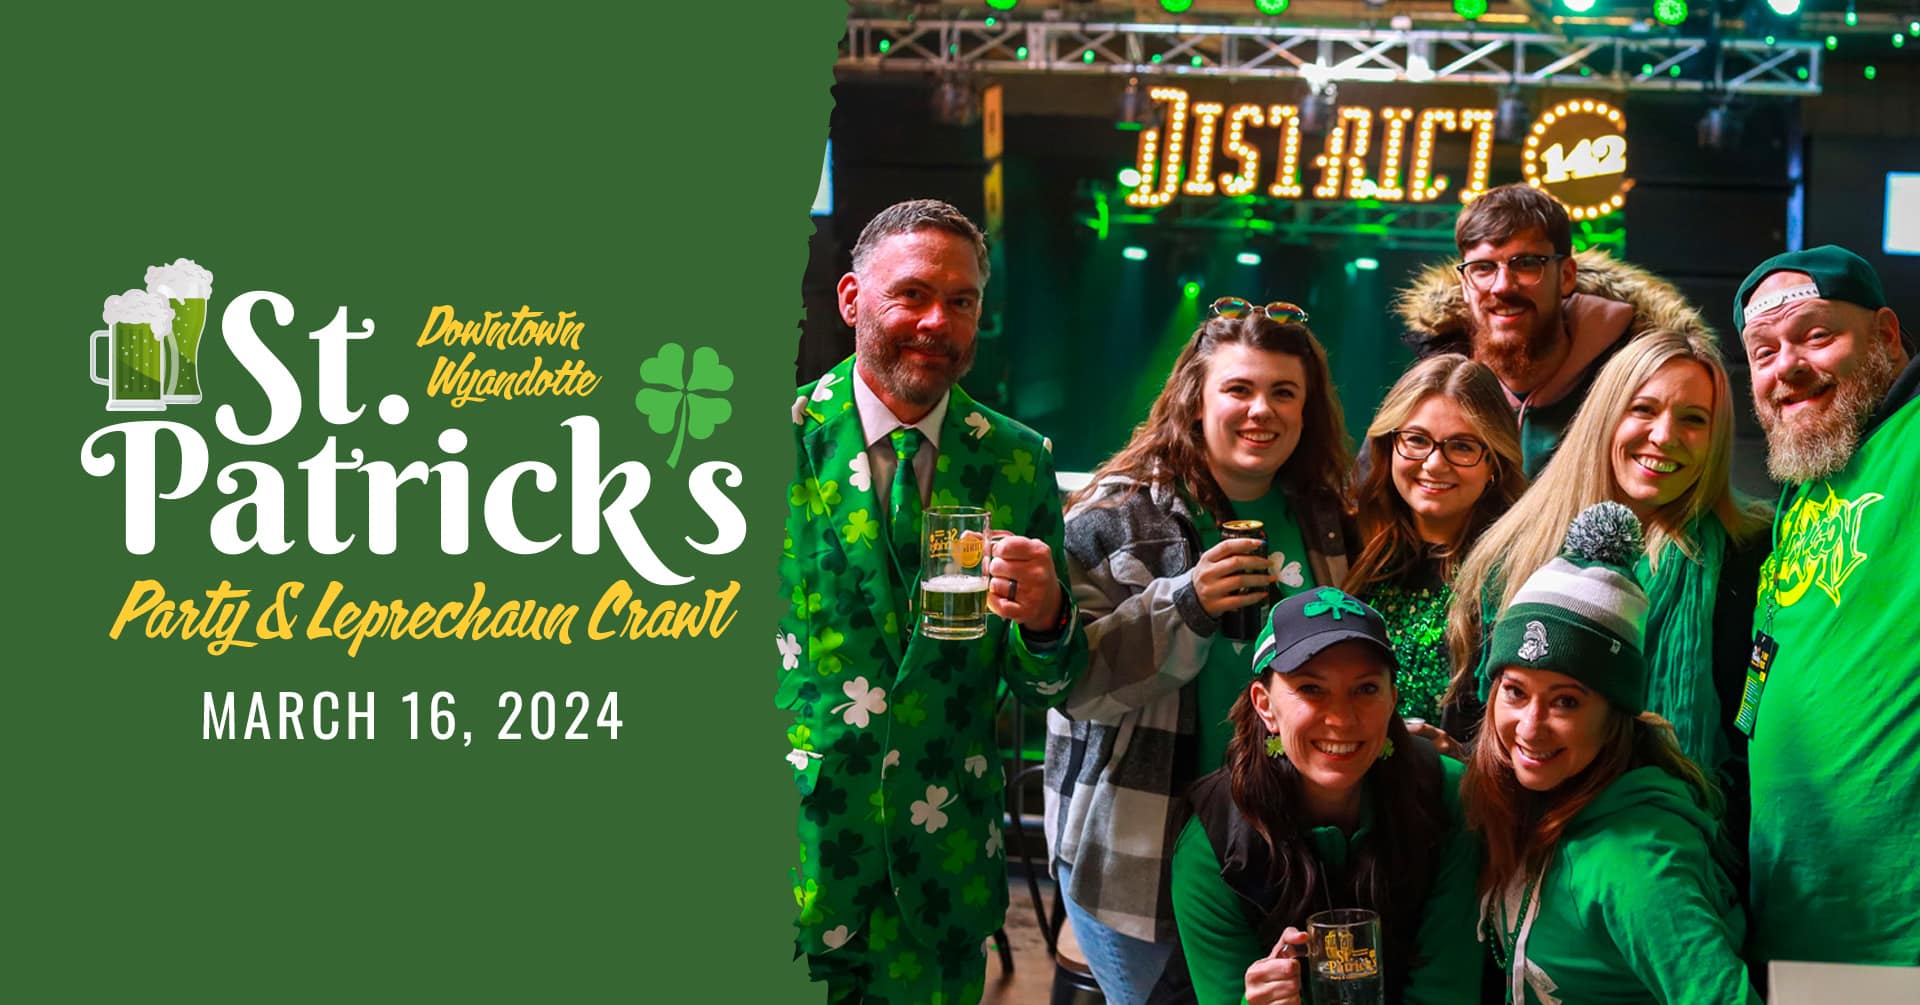 St. Patrick's Party & Leprechaun Crawl; March 16, 2024; Downtown Wyandotte; image of party goers in green